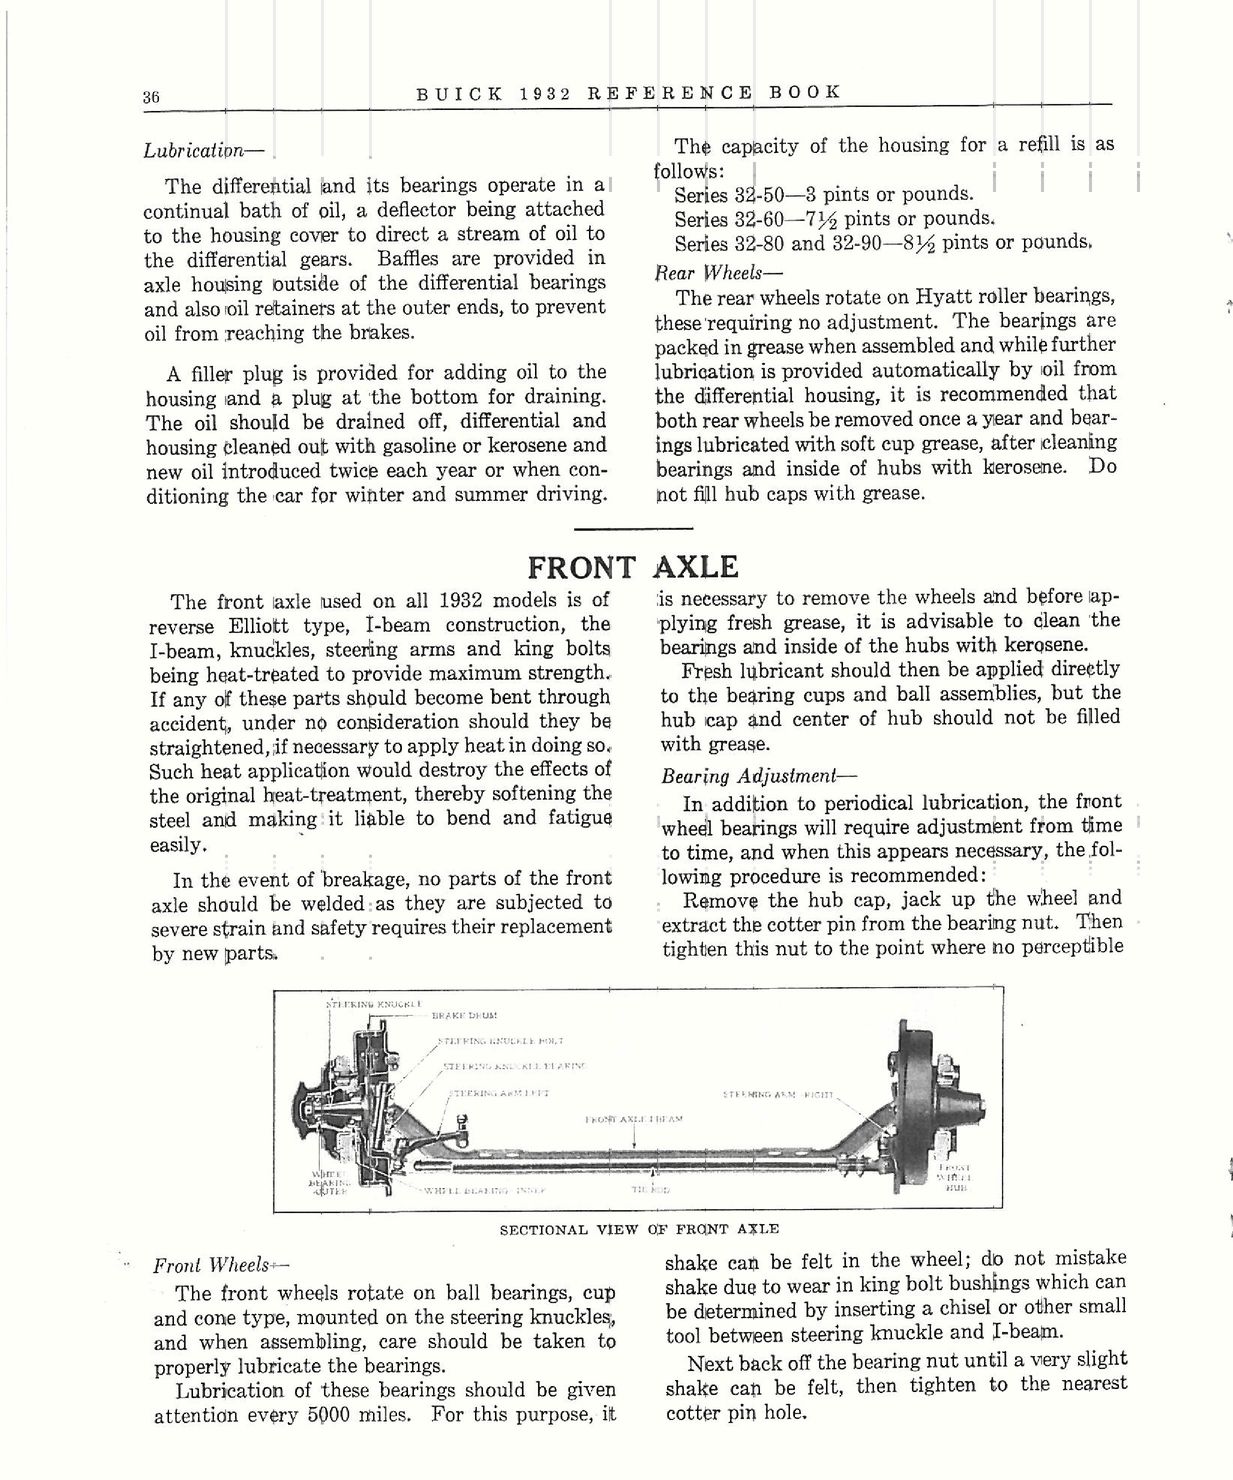 n_1932 Buick Reference Book-36.jpg